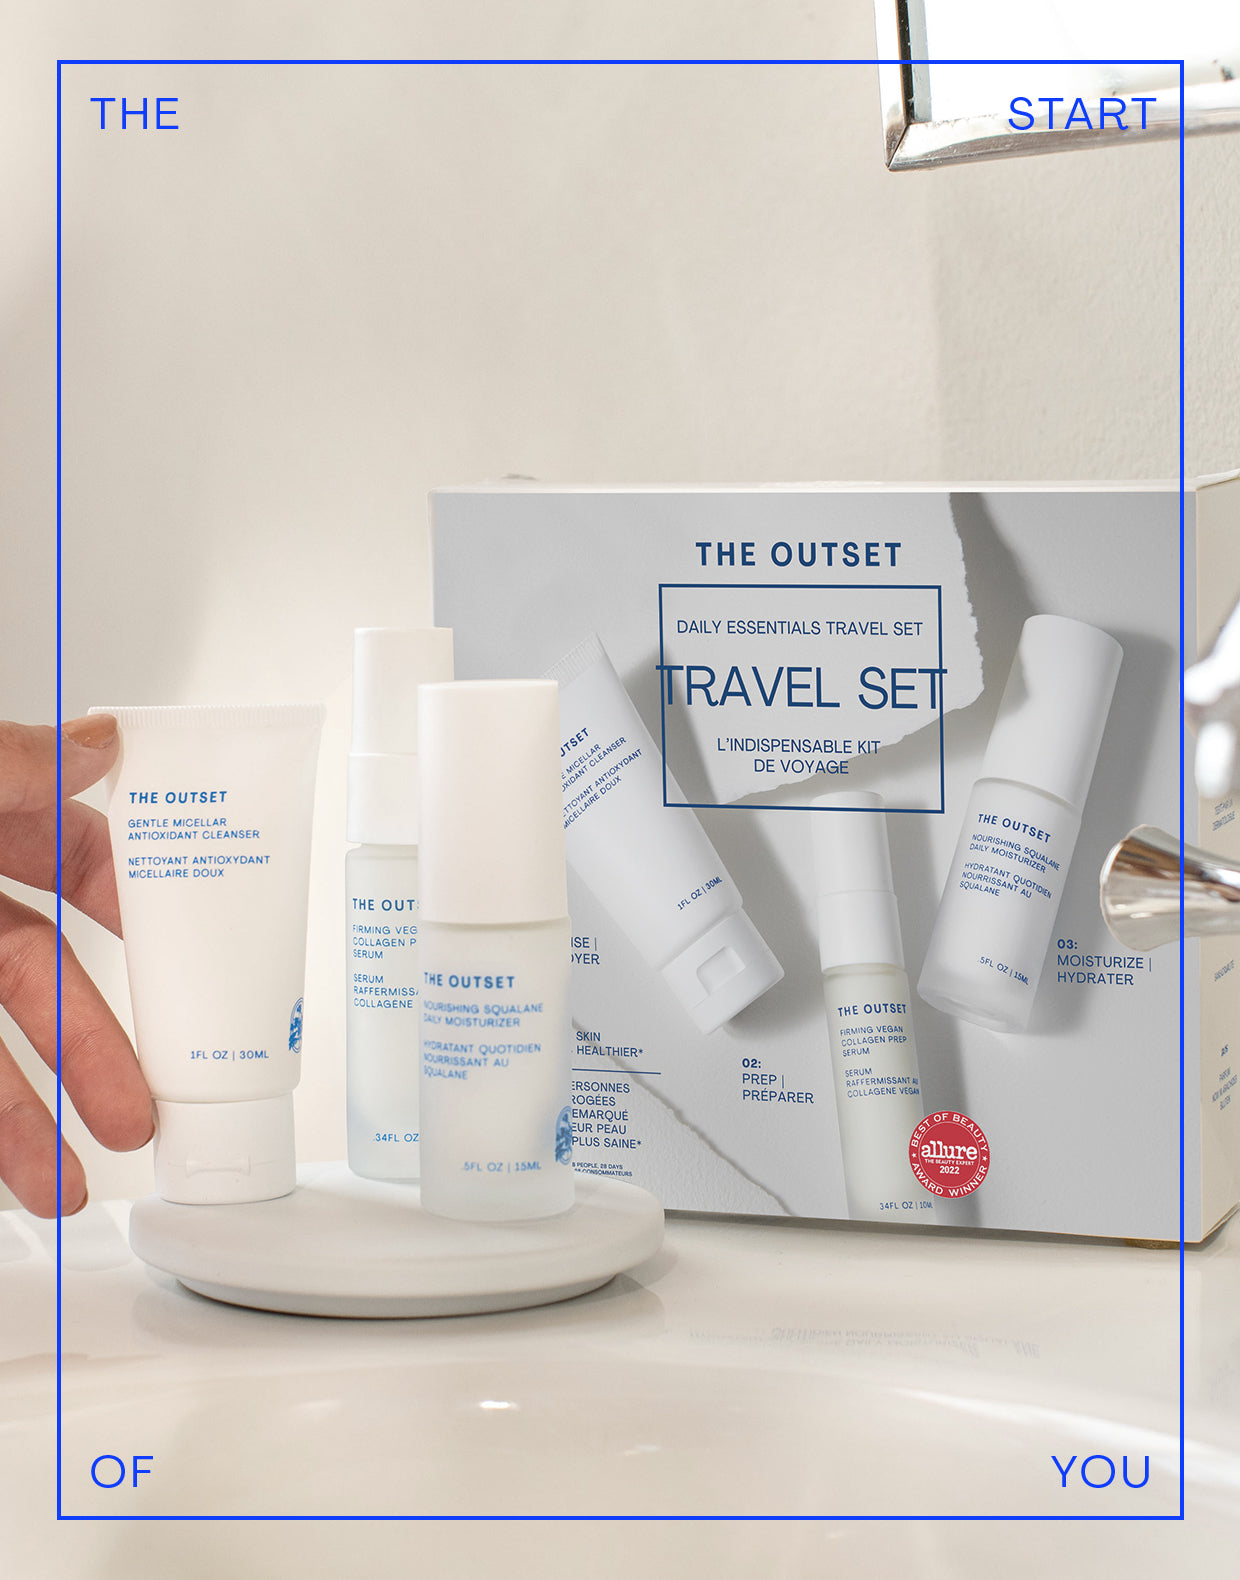 Daily Essentials Travel Set – The Outset